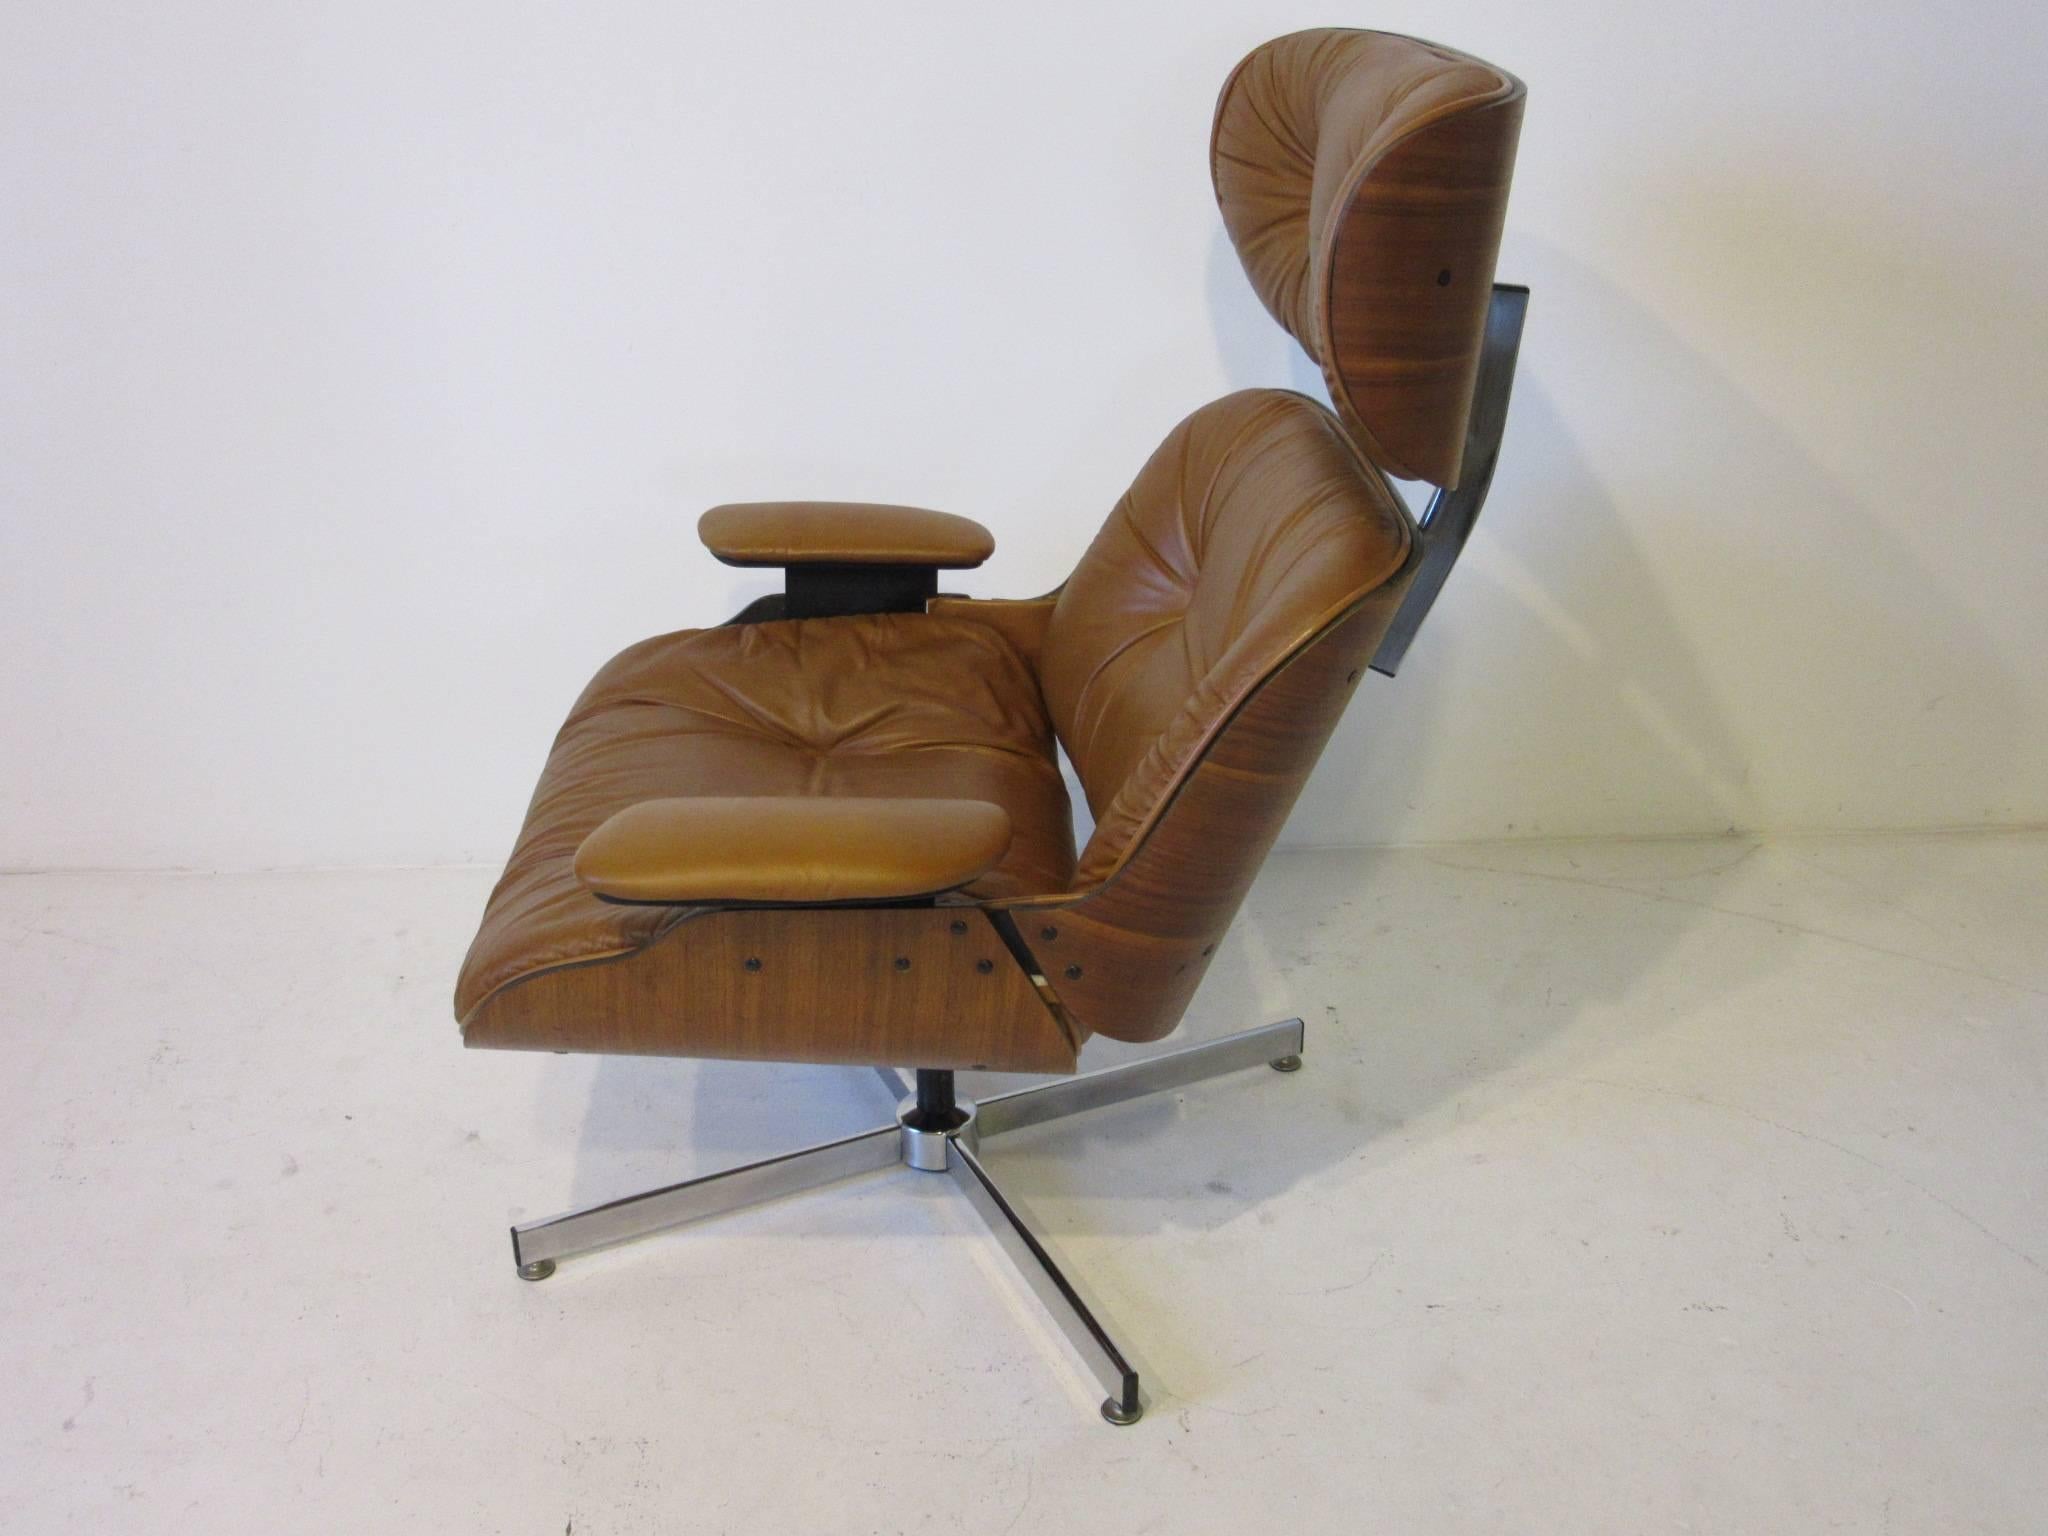 A Mulhauser designed lounge chair in cognac leather with walnut body and chromed metal base. The Plycraft model has an adjustable spring to the bottom for rocking and rake, unlike the Eames model which has a set angle and is uncomfortable to some.